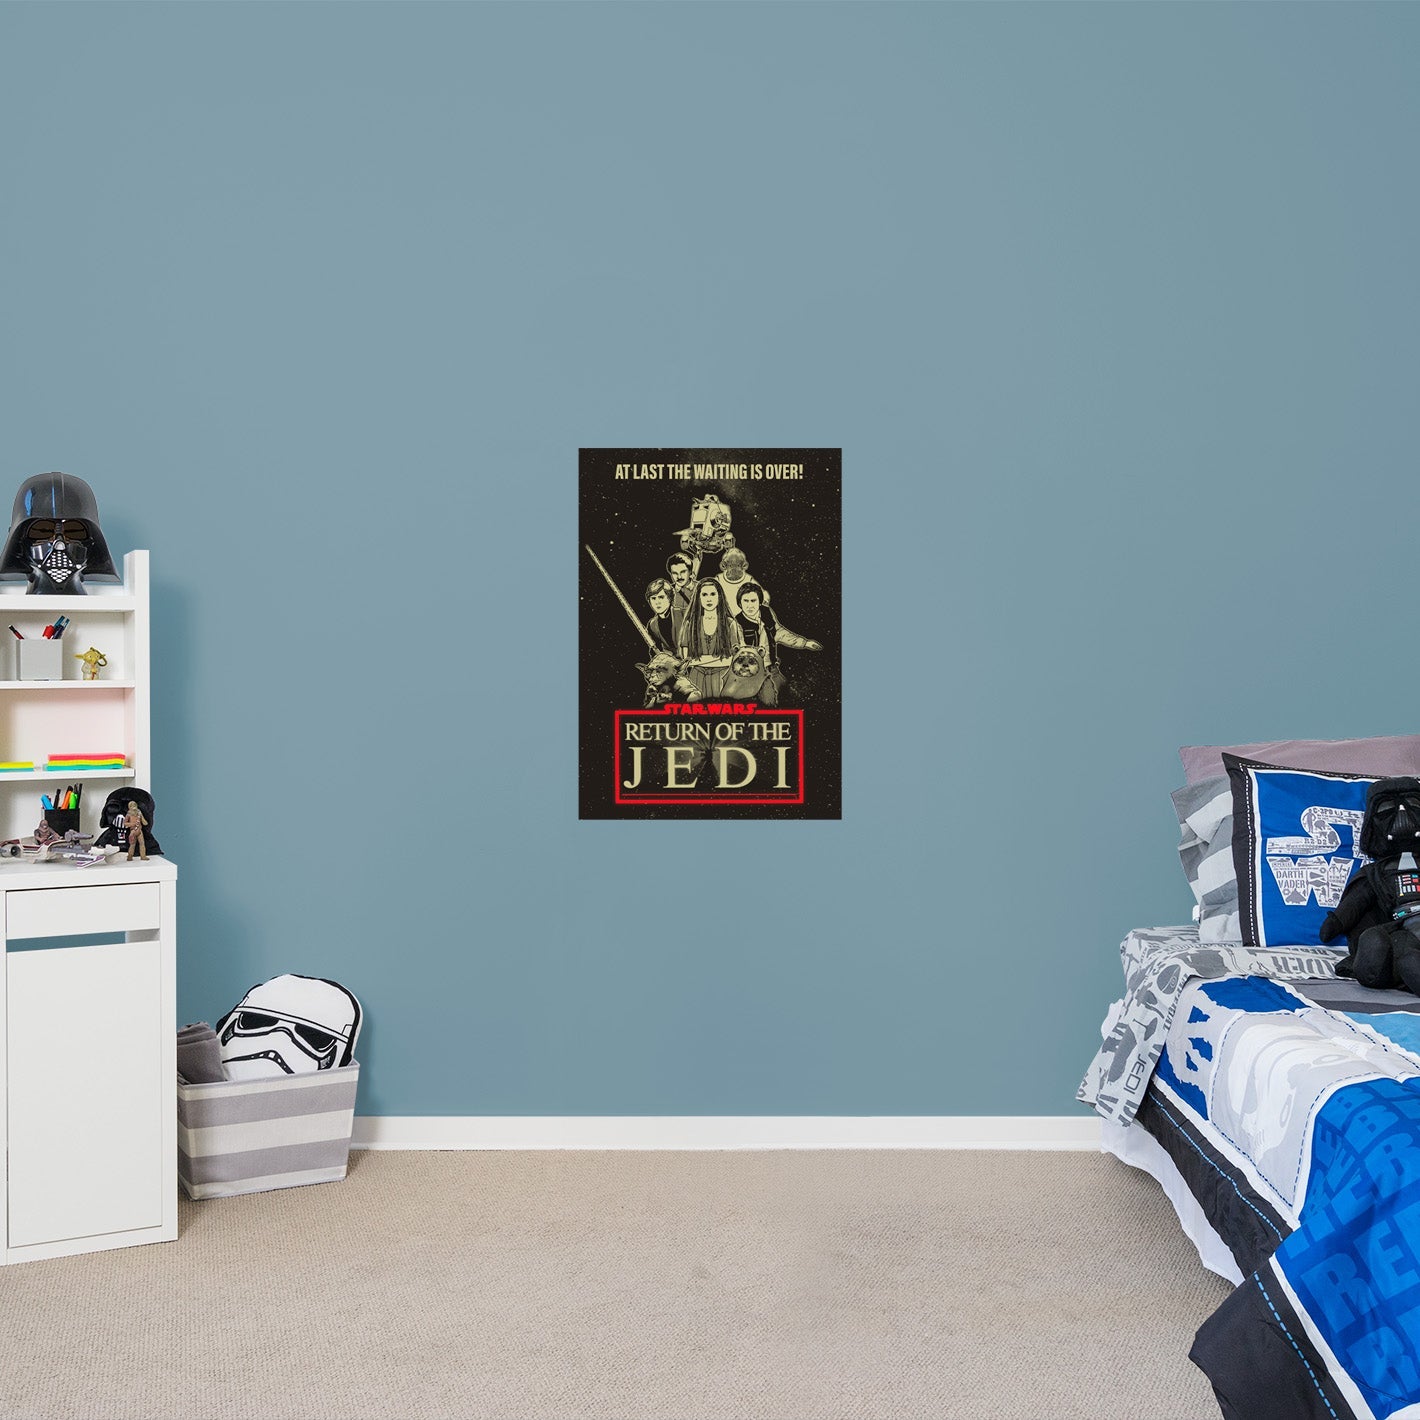 Return of the Jedi 40th: Waiting Is Over Movie Poster - Officially Licensed Star Wars Removable Adhesive Decal